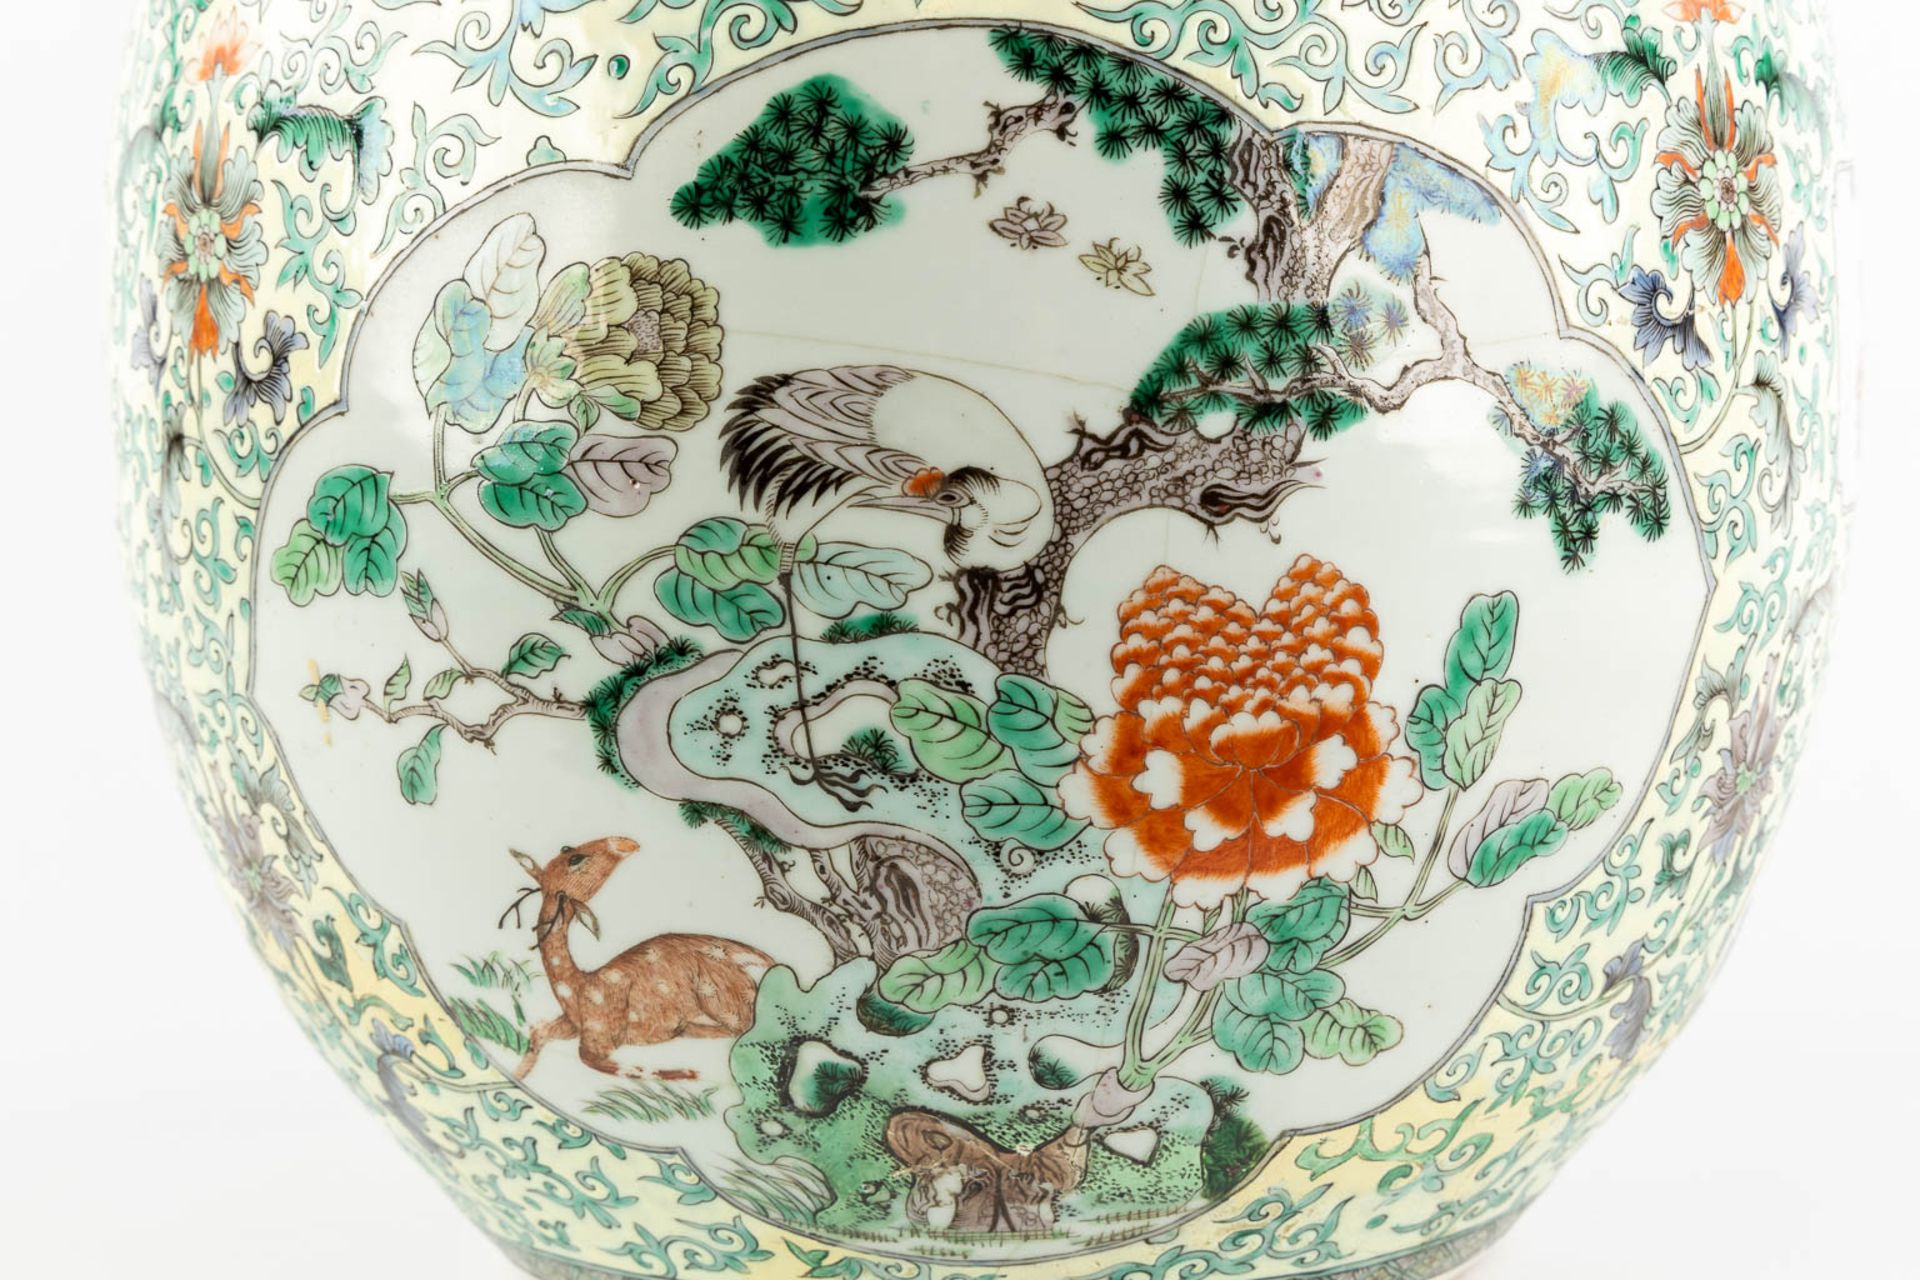 A Large Chinese Cache-Pot, Famille Verte decorated with fauna and flora. 19th C. (H:35 x D:40 cm) - Image 11 of 14